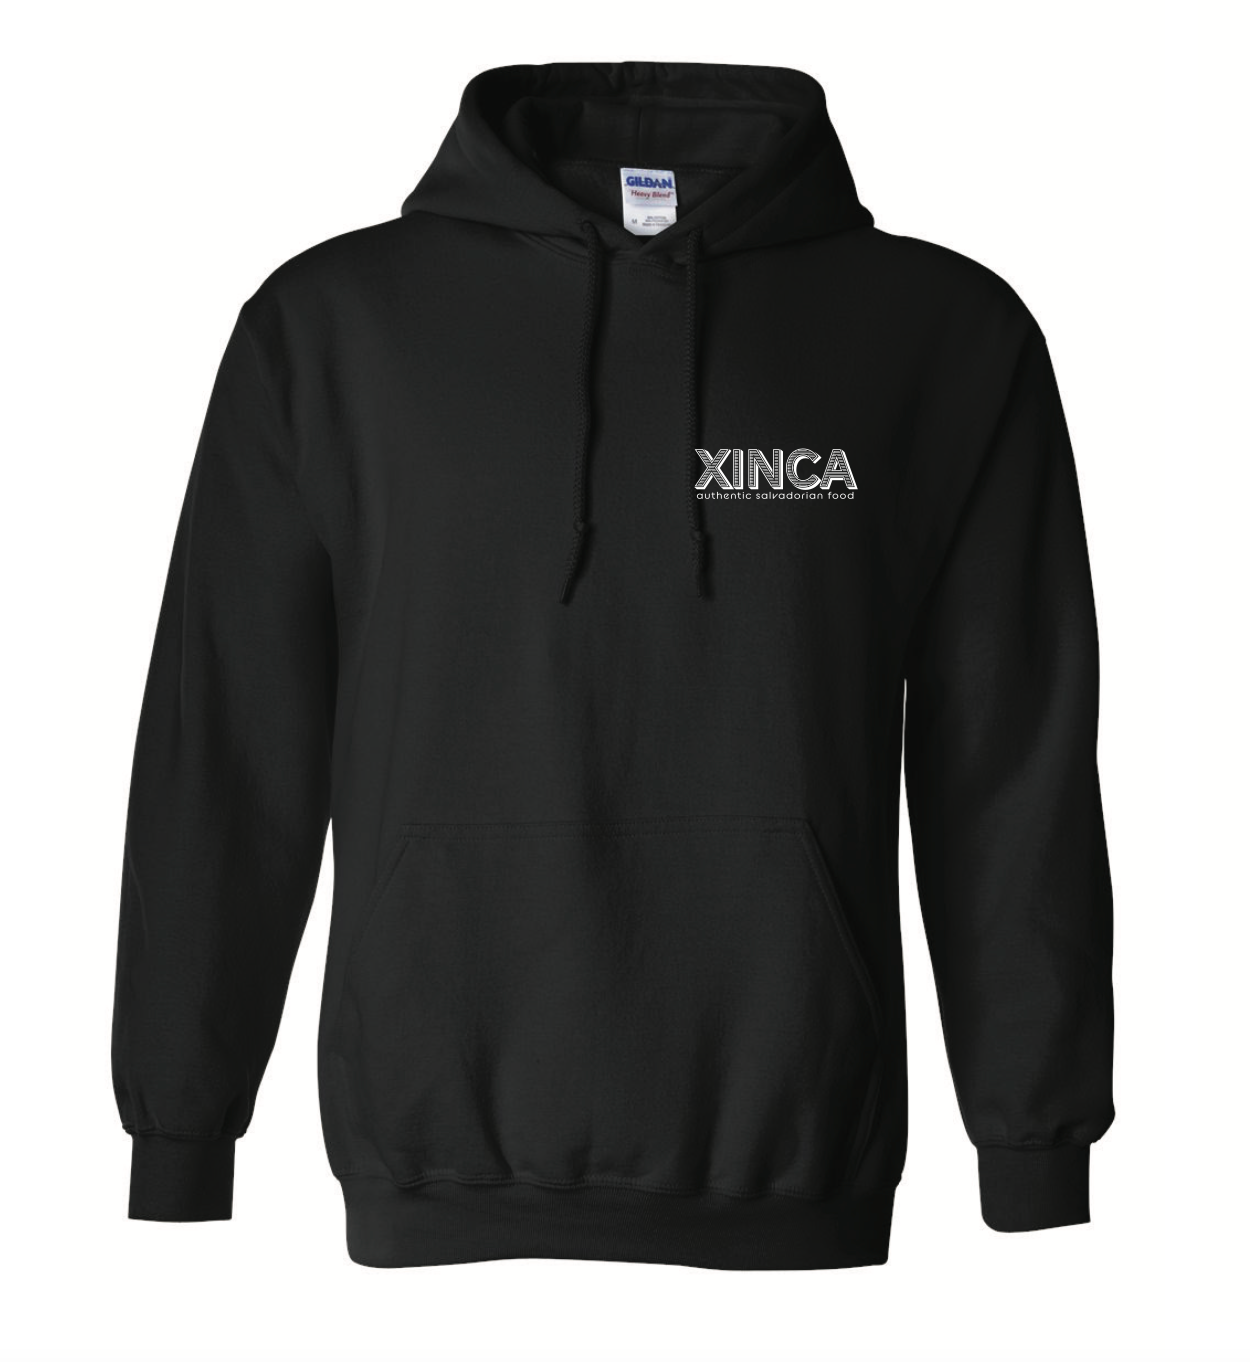 The Front of the El Loroco Sweater with Xinca Authentic Salvadorian Food Logo